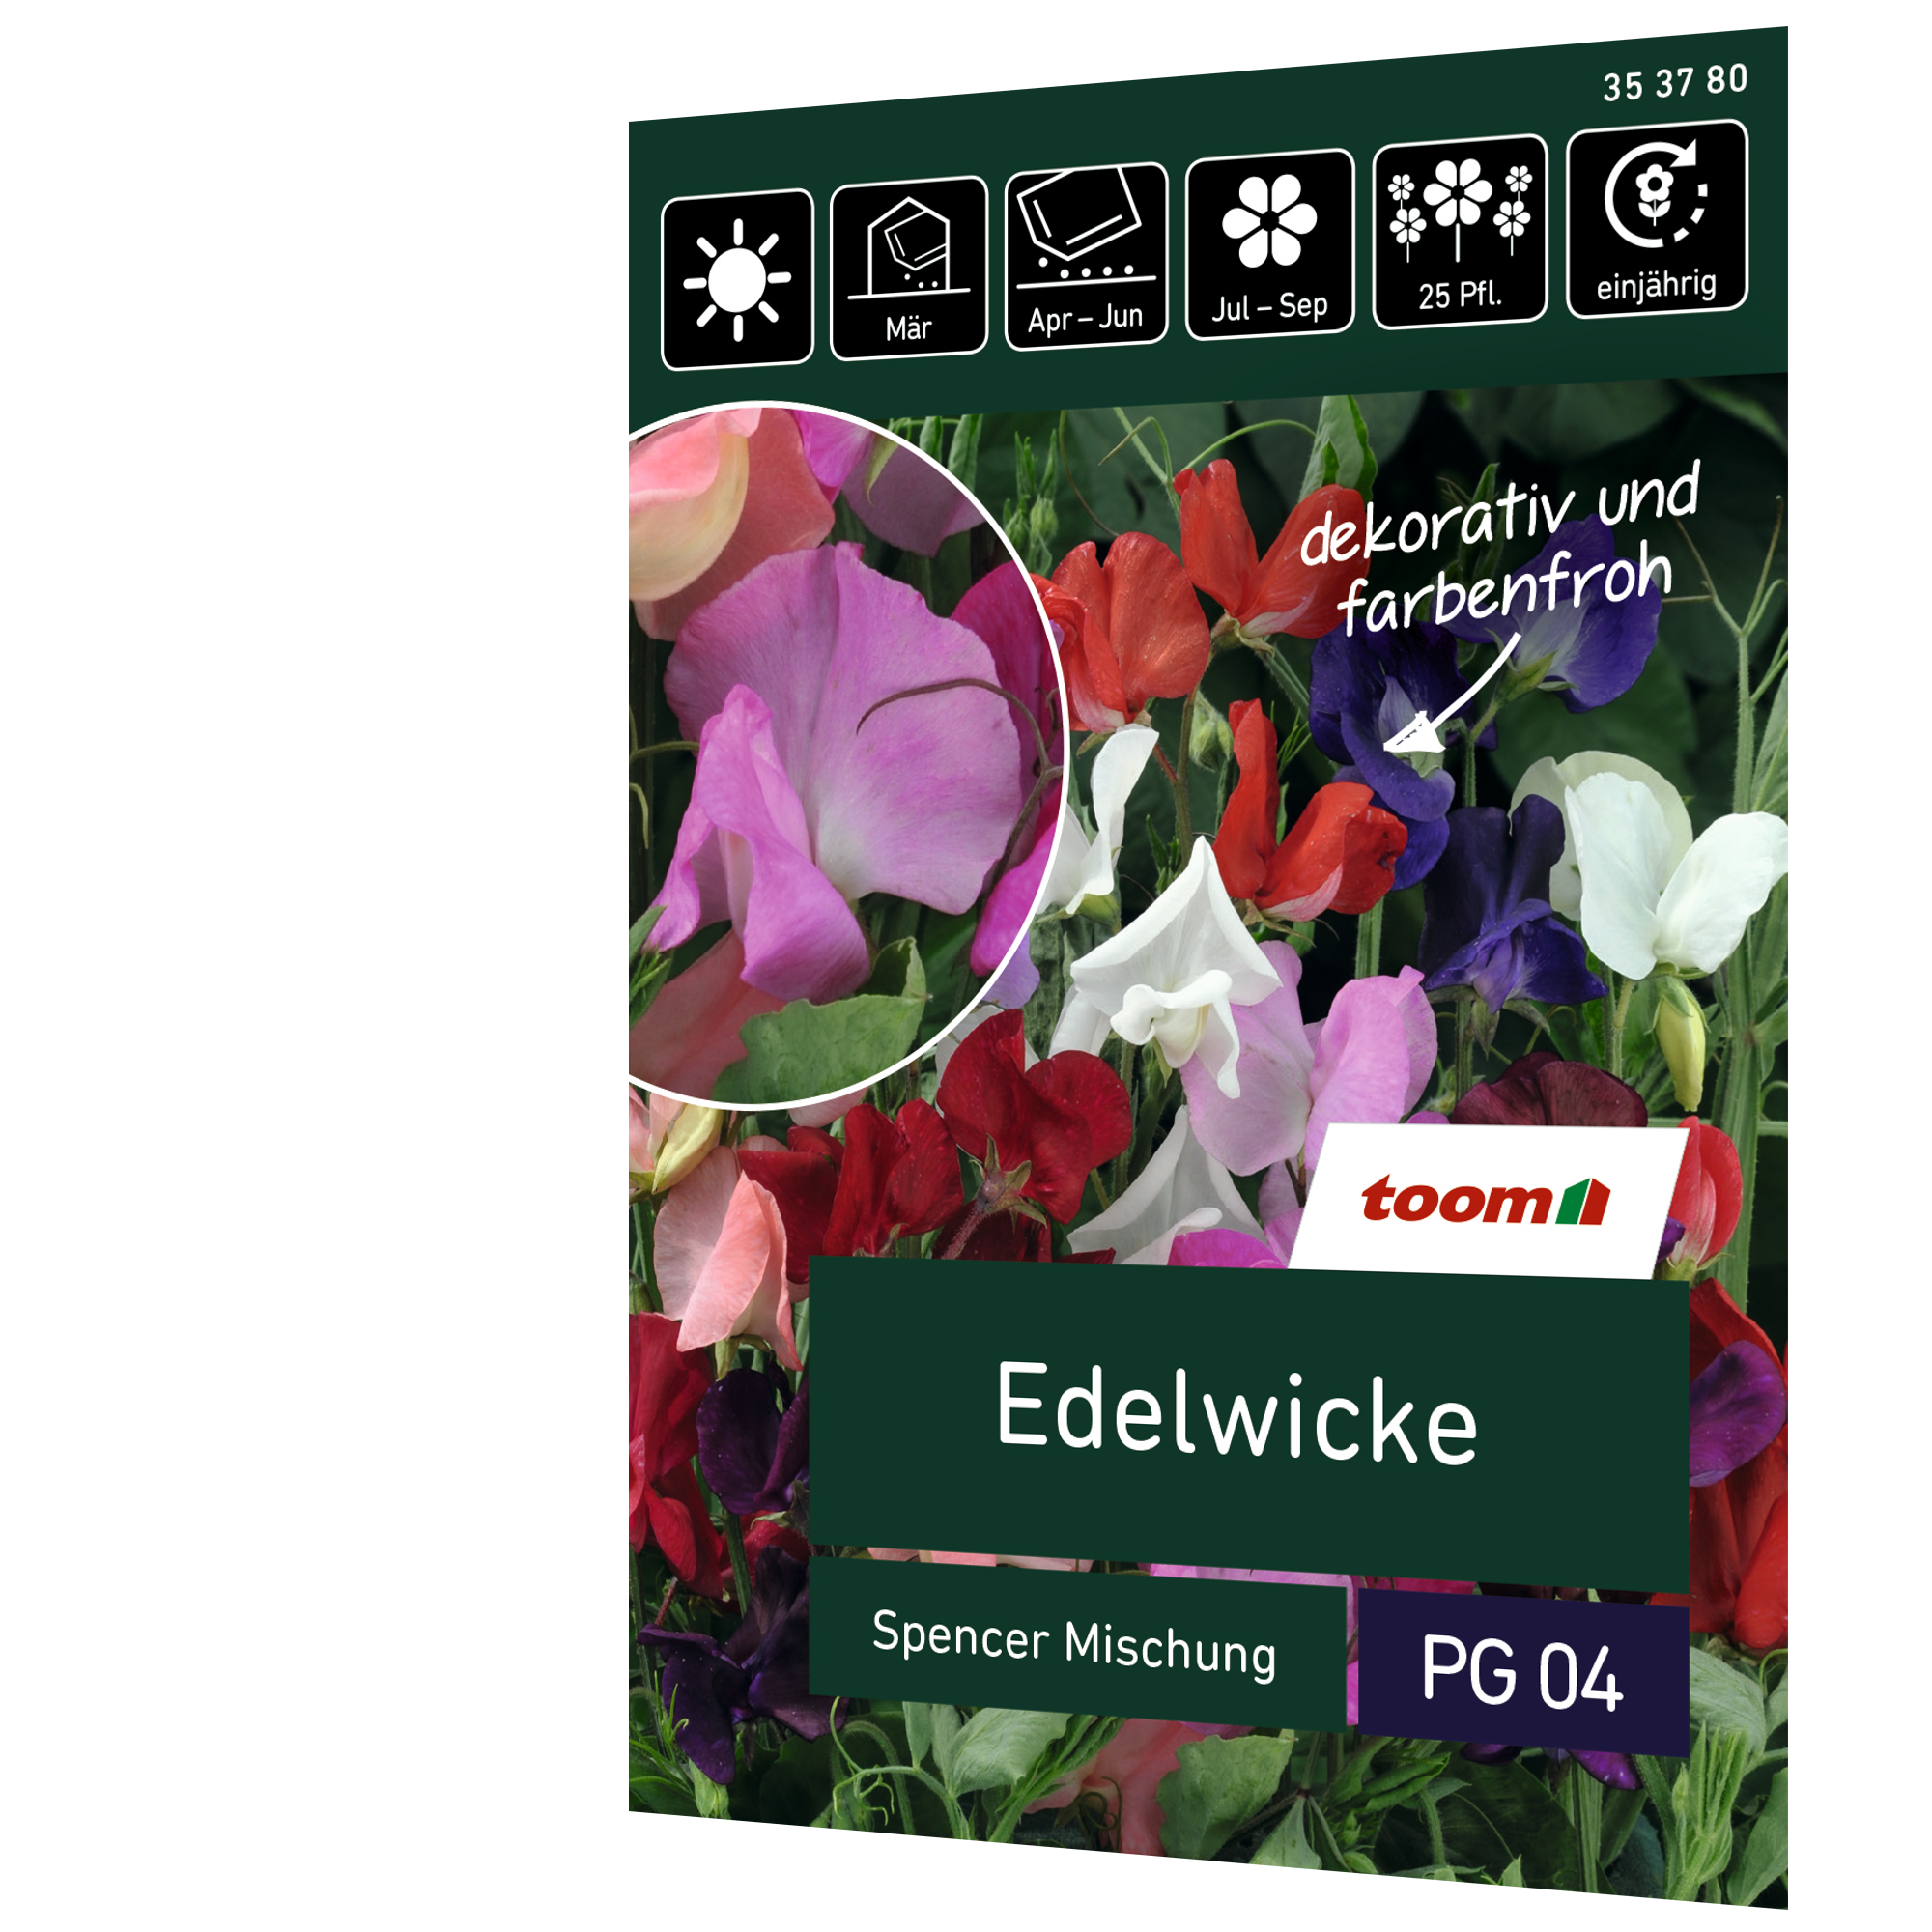 Edelwicke 'Spencer Mischung' + product picture